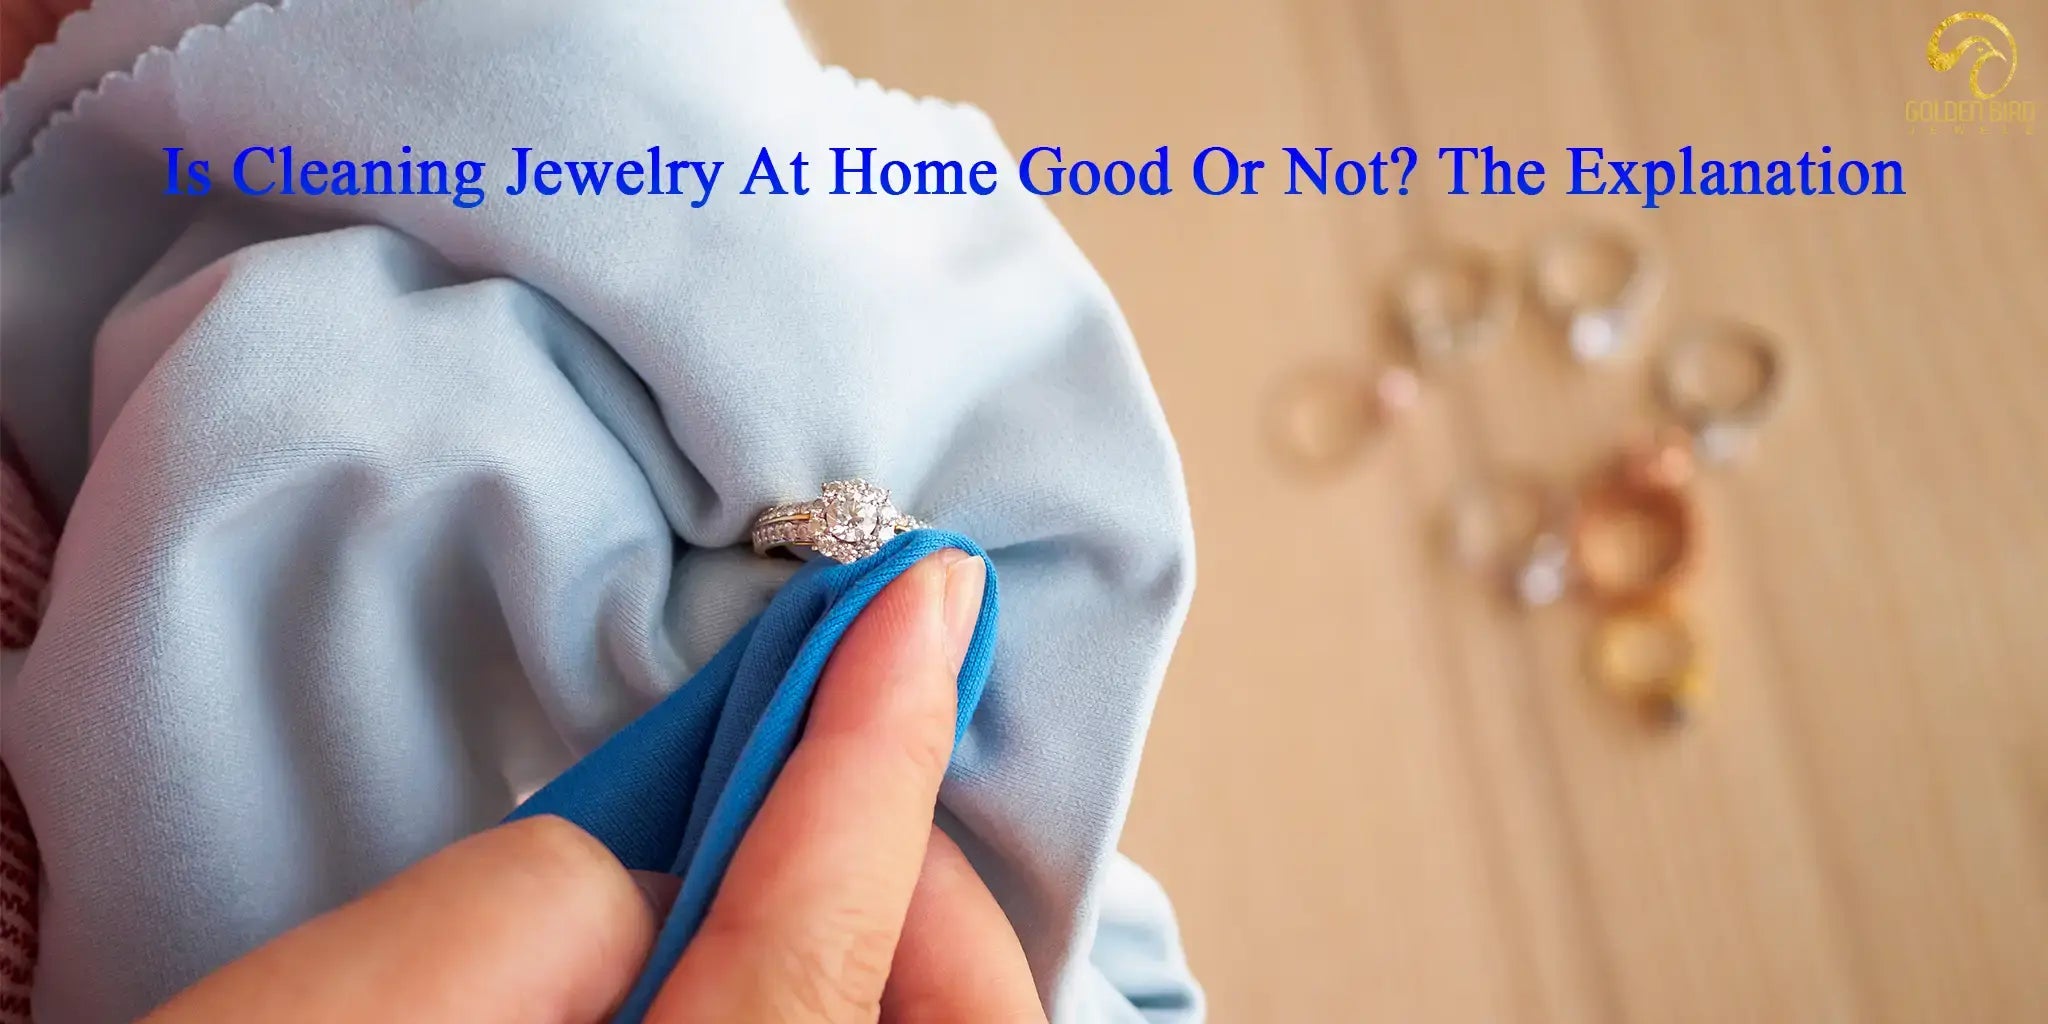 Cleaning jewelry at home with comparison to professional expert and skilled cleaning